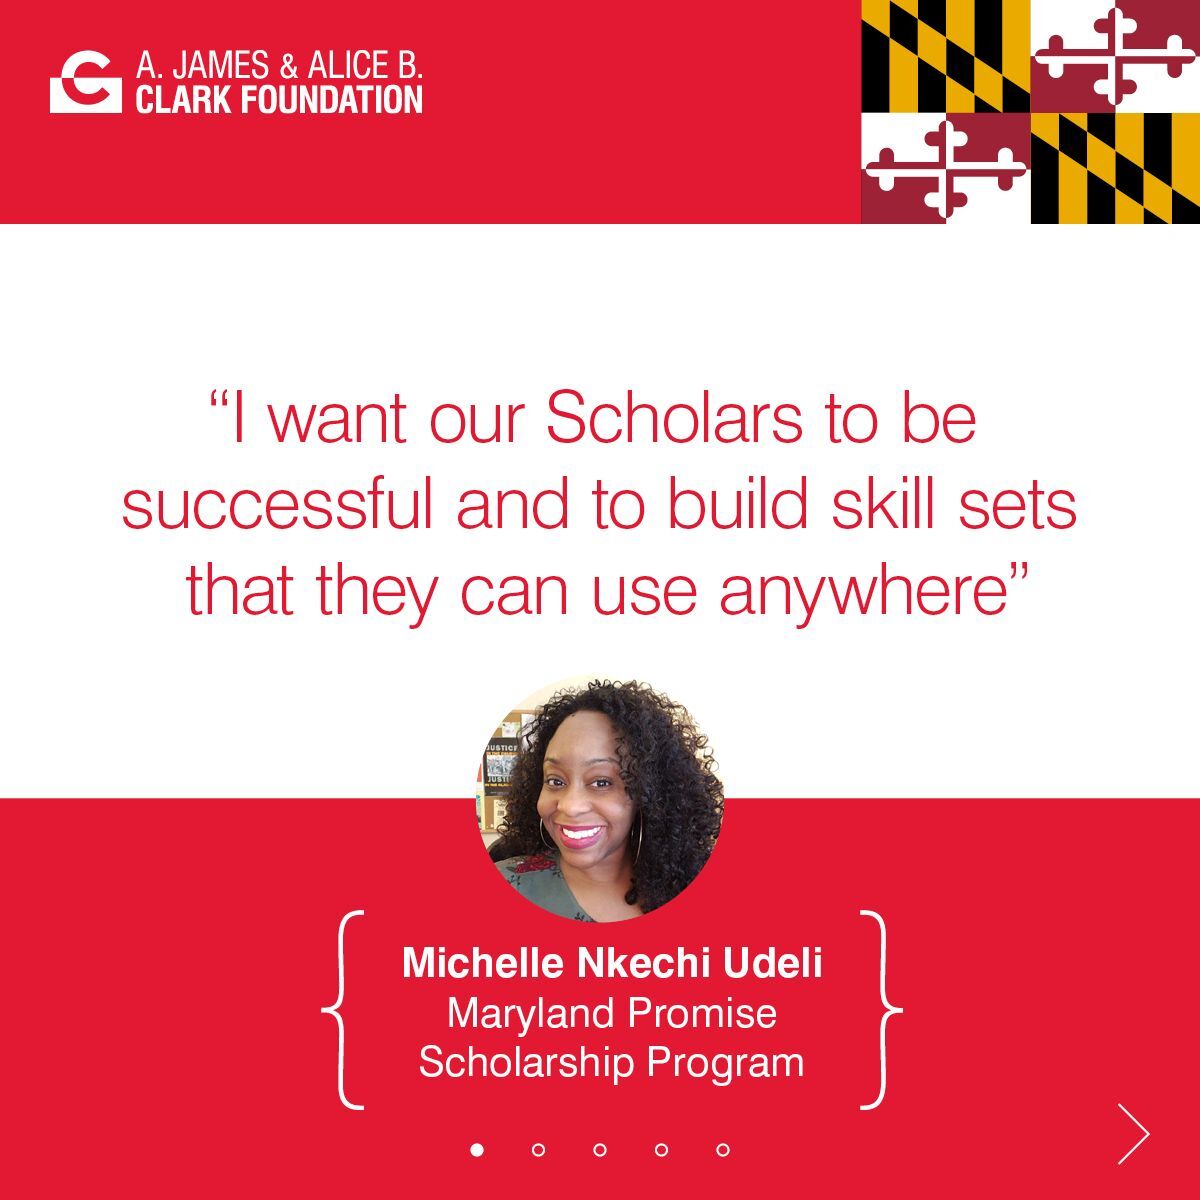 The Maryland Promise Scholarship Program #MPP cultivates the next generation of leaders and community change agents